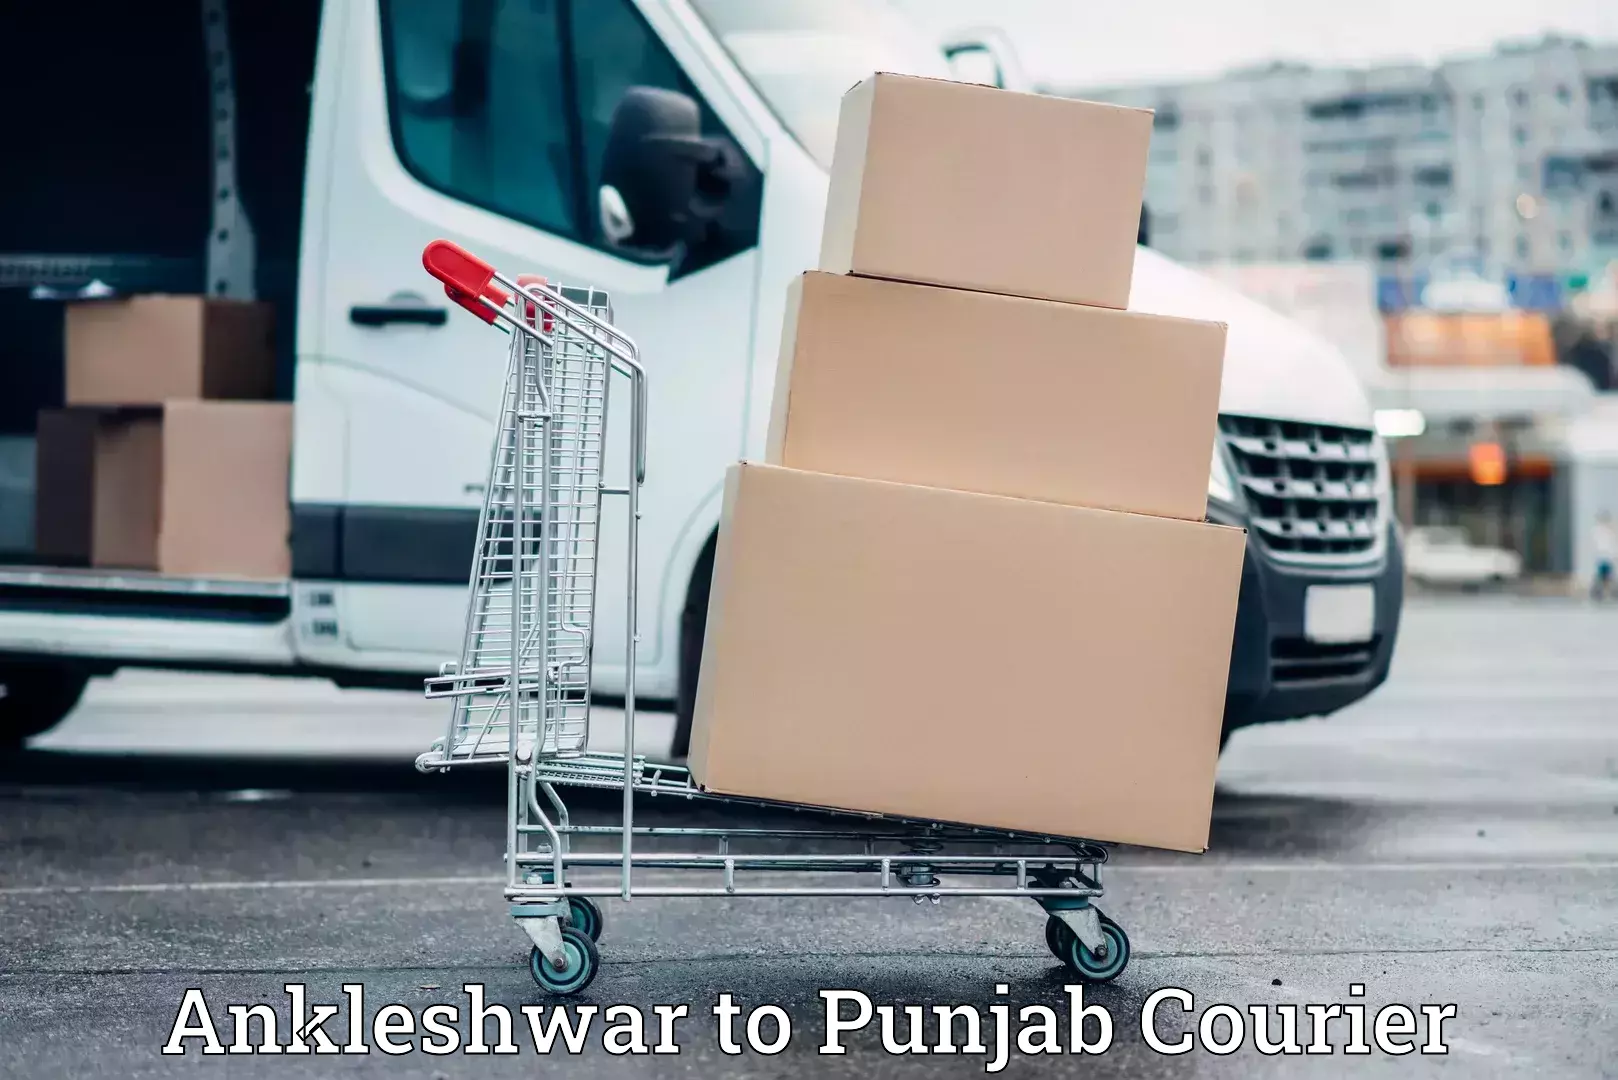 Trusted relocation services Ankleshwar to Punjab